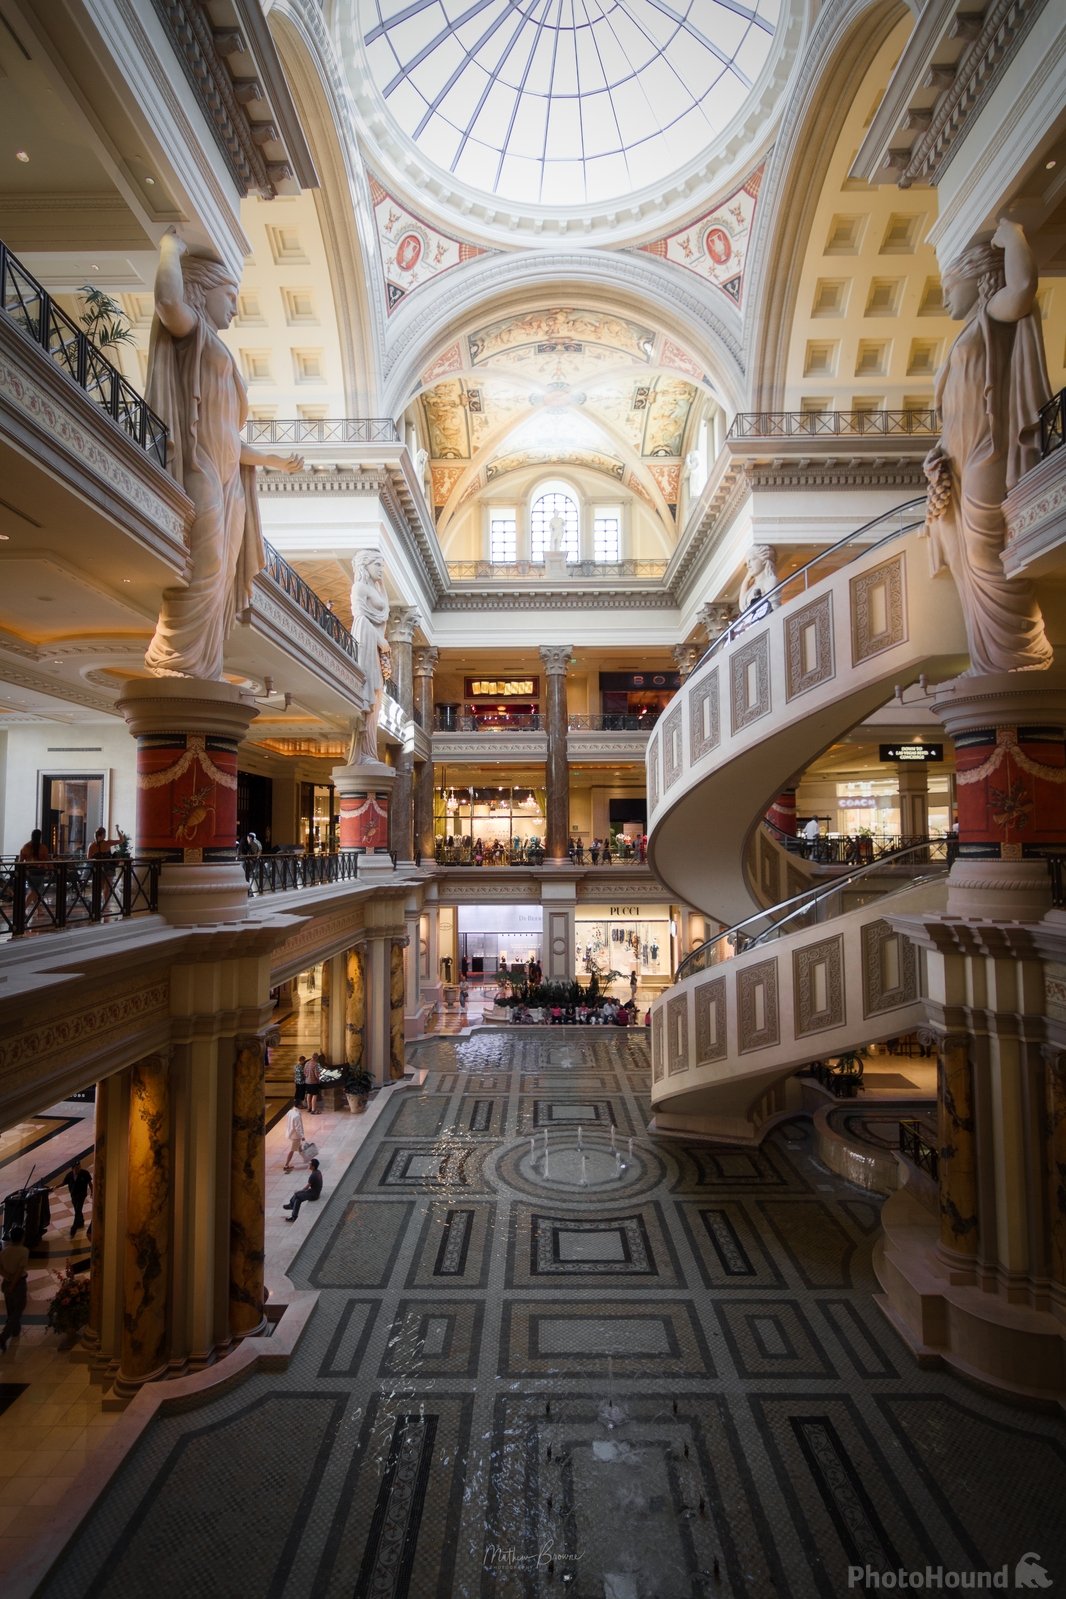 Image of The Forum Shops at Caesars by Mathew Browne